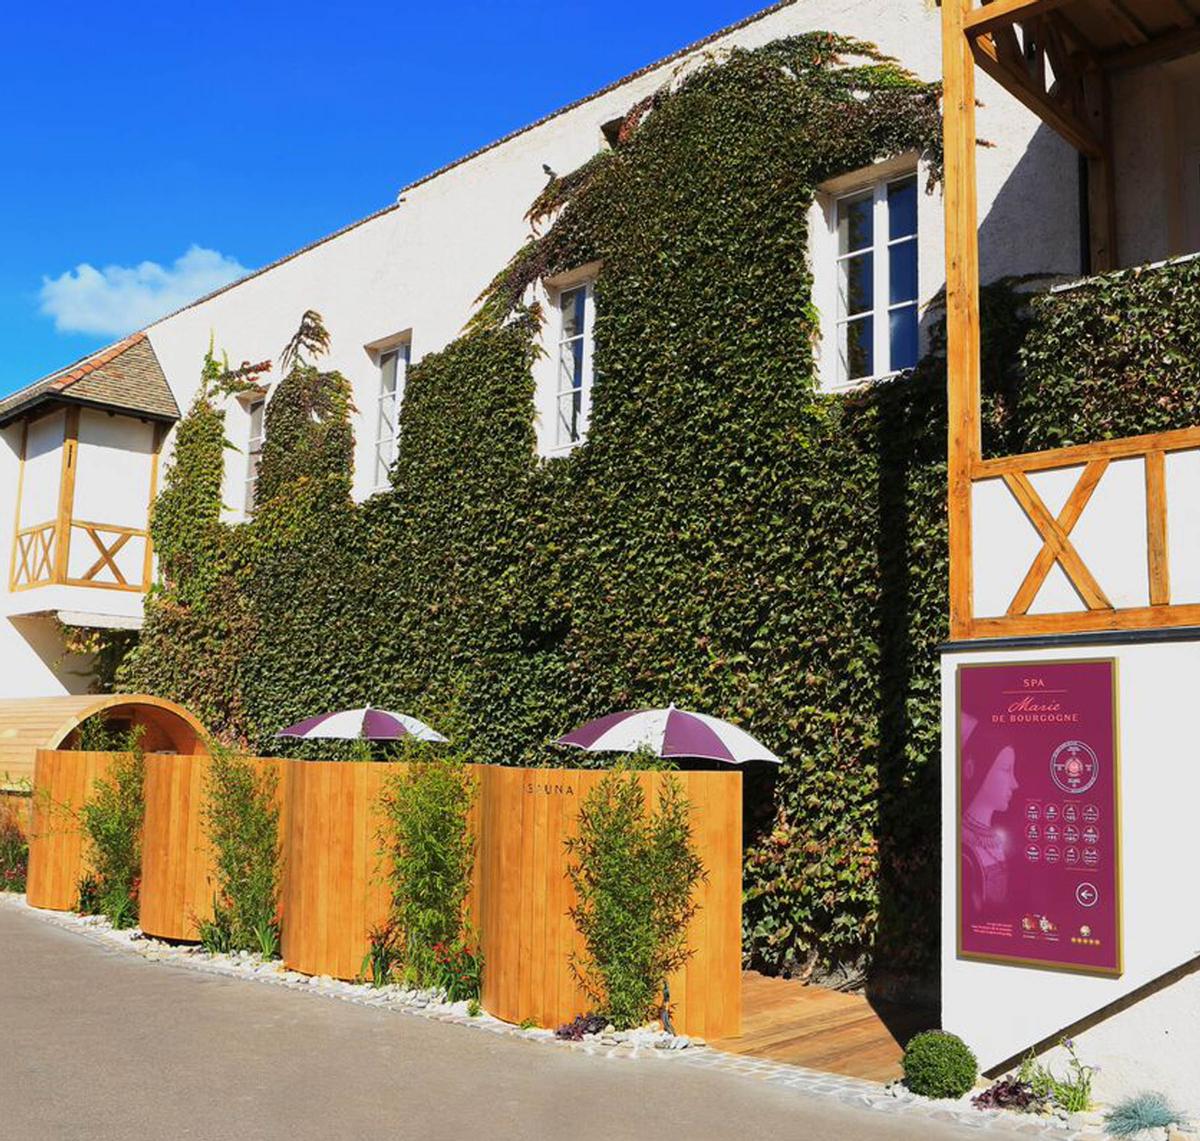 Located across from the hotel in the former meeting rooms, the 350sq m (3,767sq ft) Spa Marie de Bourgogne also features high, wooden-beamed ceilings and a fresco mural depicting the vineyards of Burgundy / Le Cep